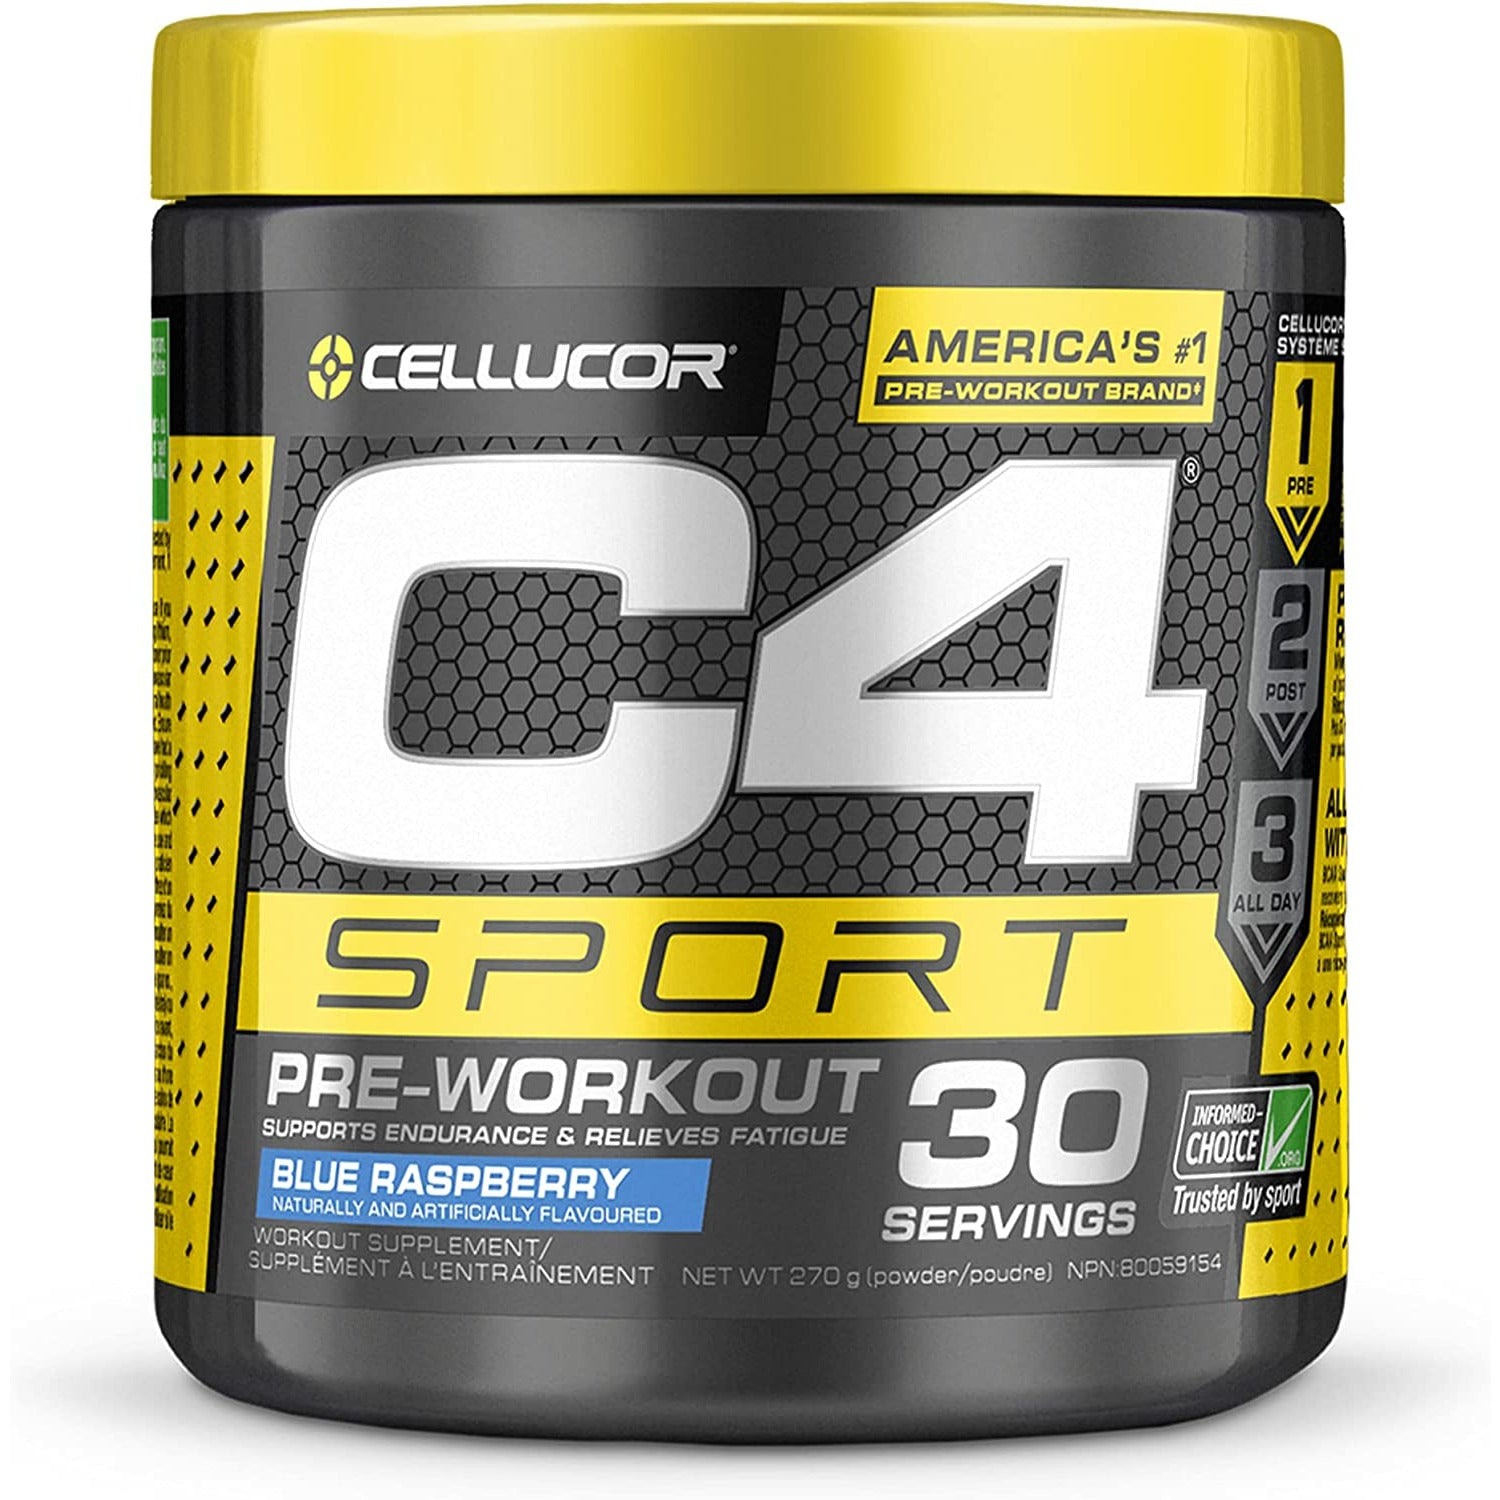 Cellucor NEW C4 SPORT Pre-Workout (30 servings) Blue Raspberry Cellucor